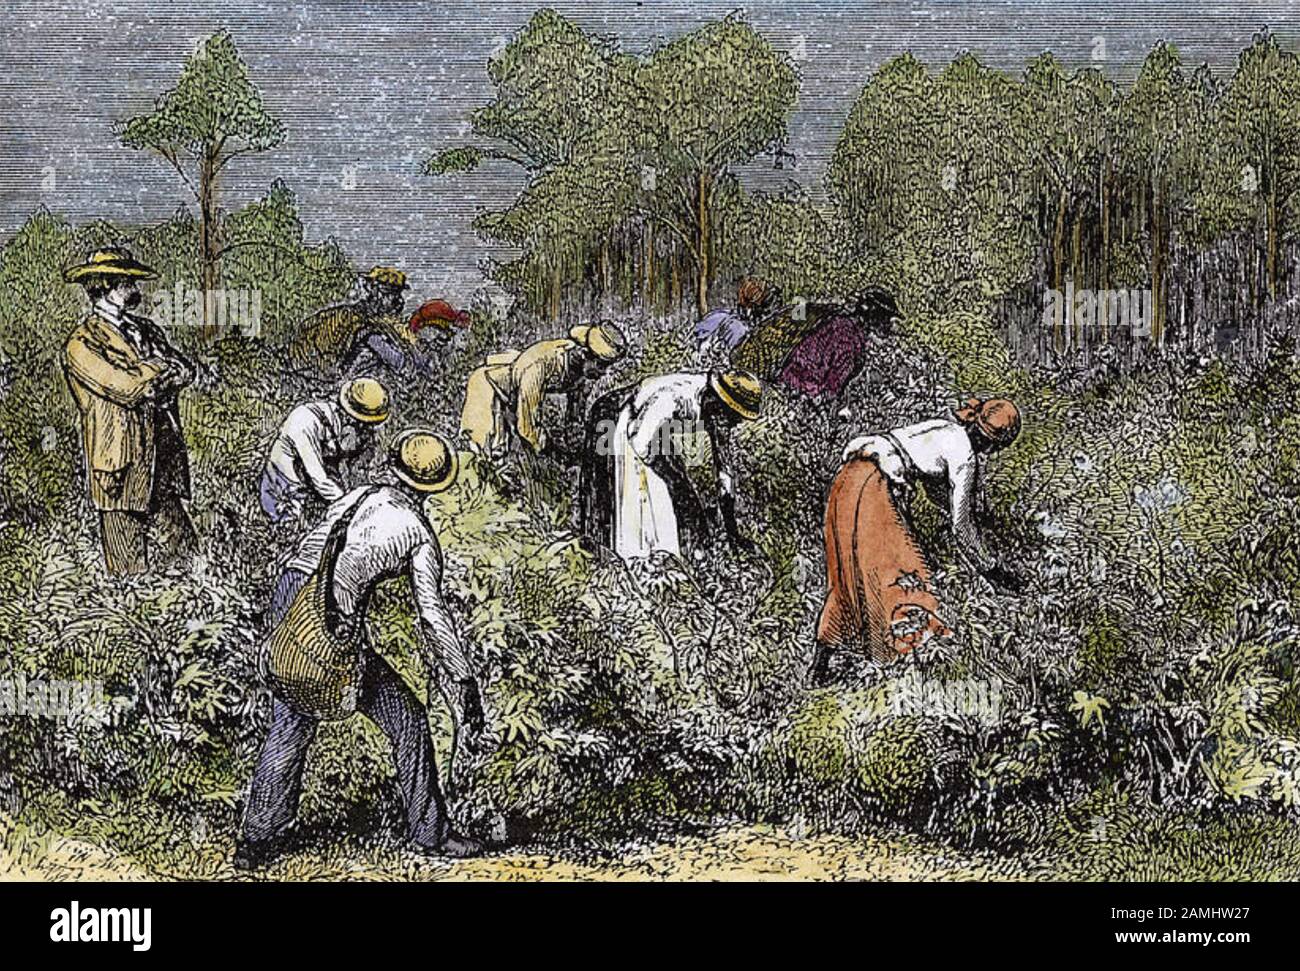 COTTON PICKING in the American South mid 1800s Stock Photo